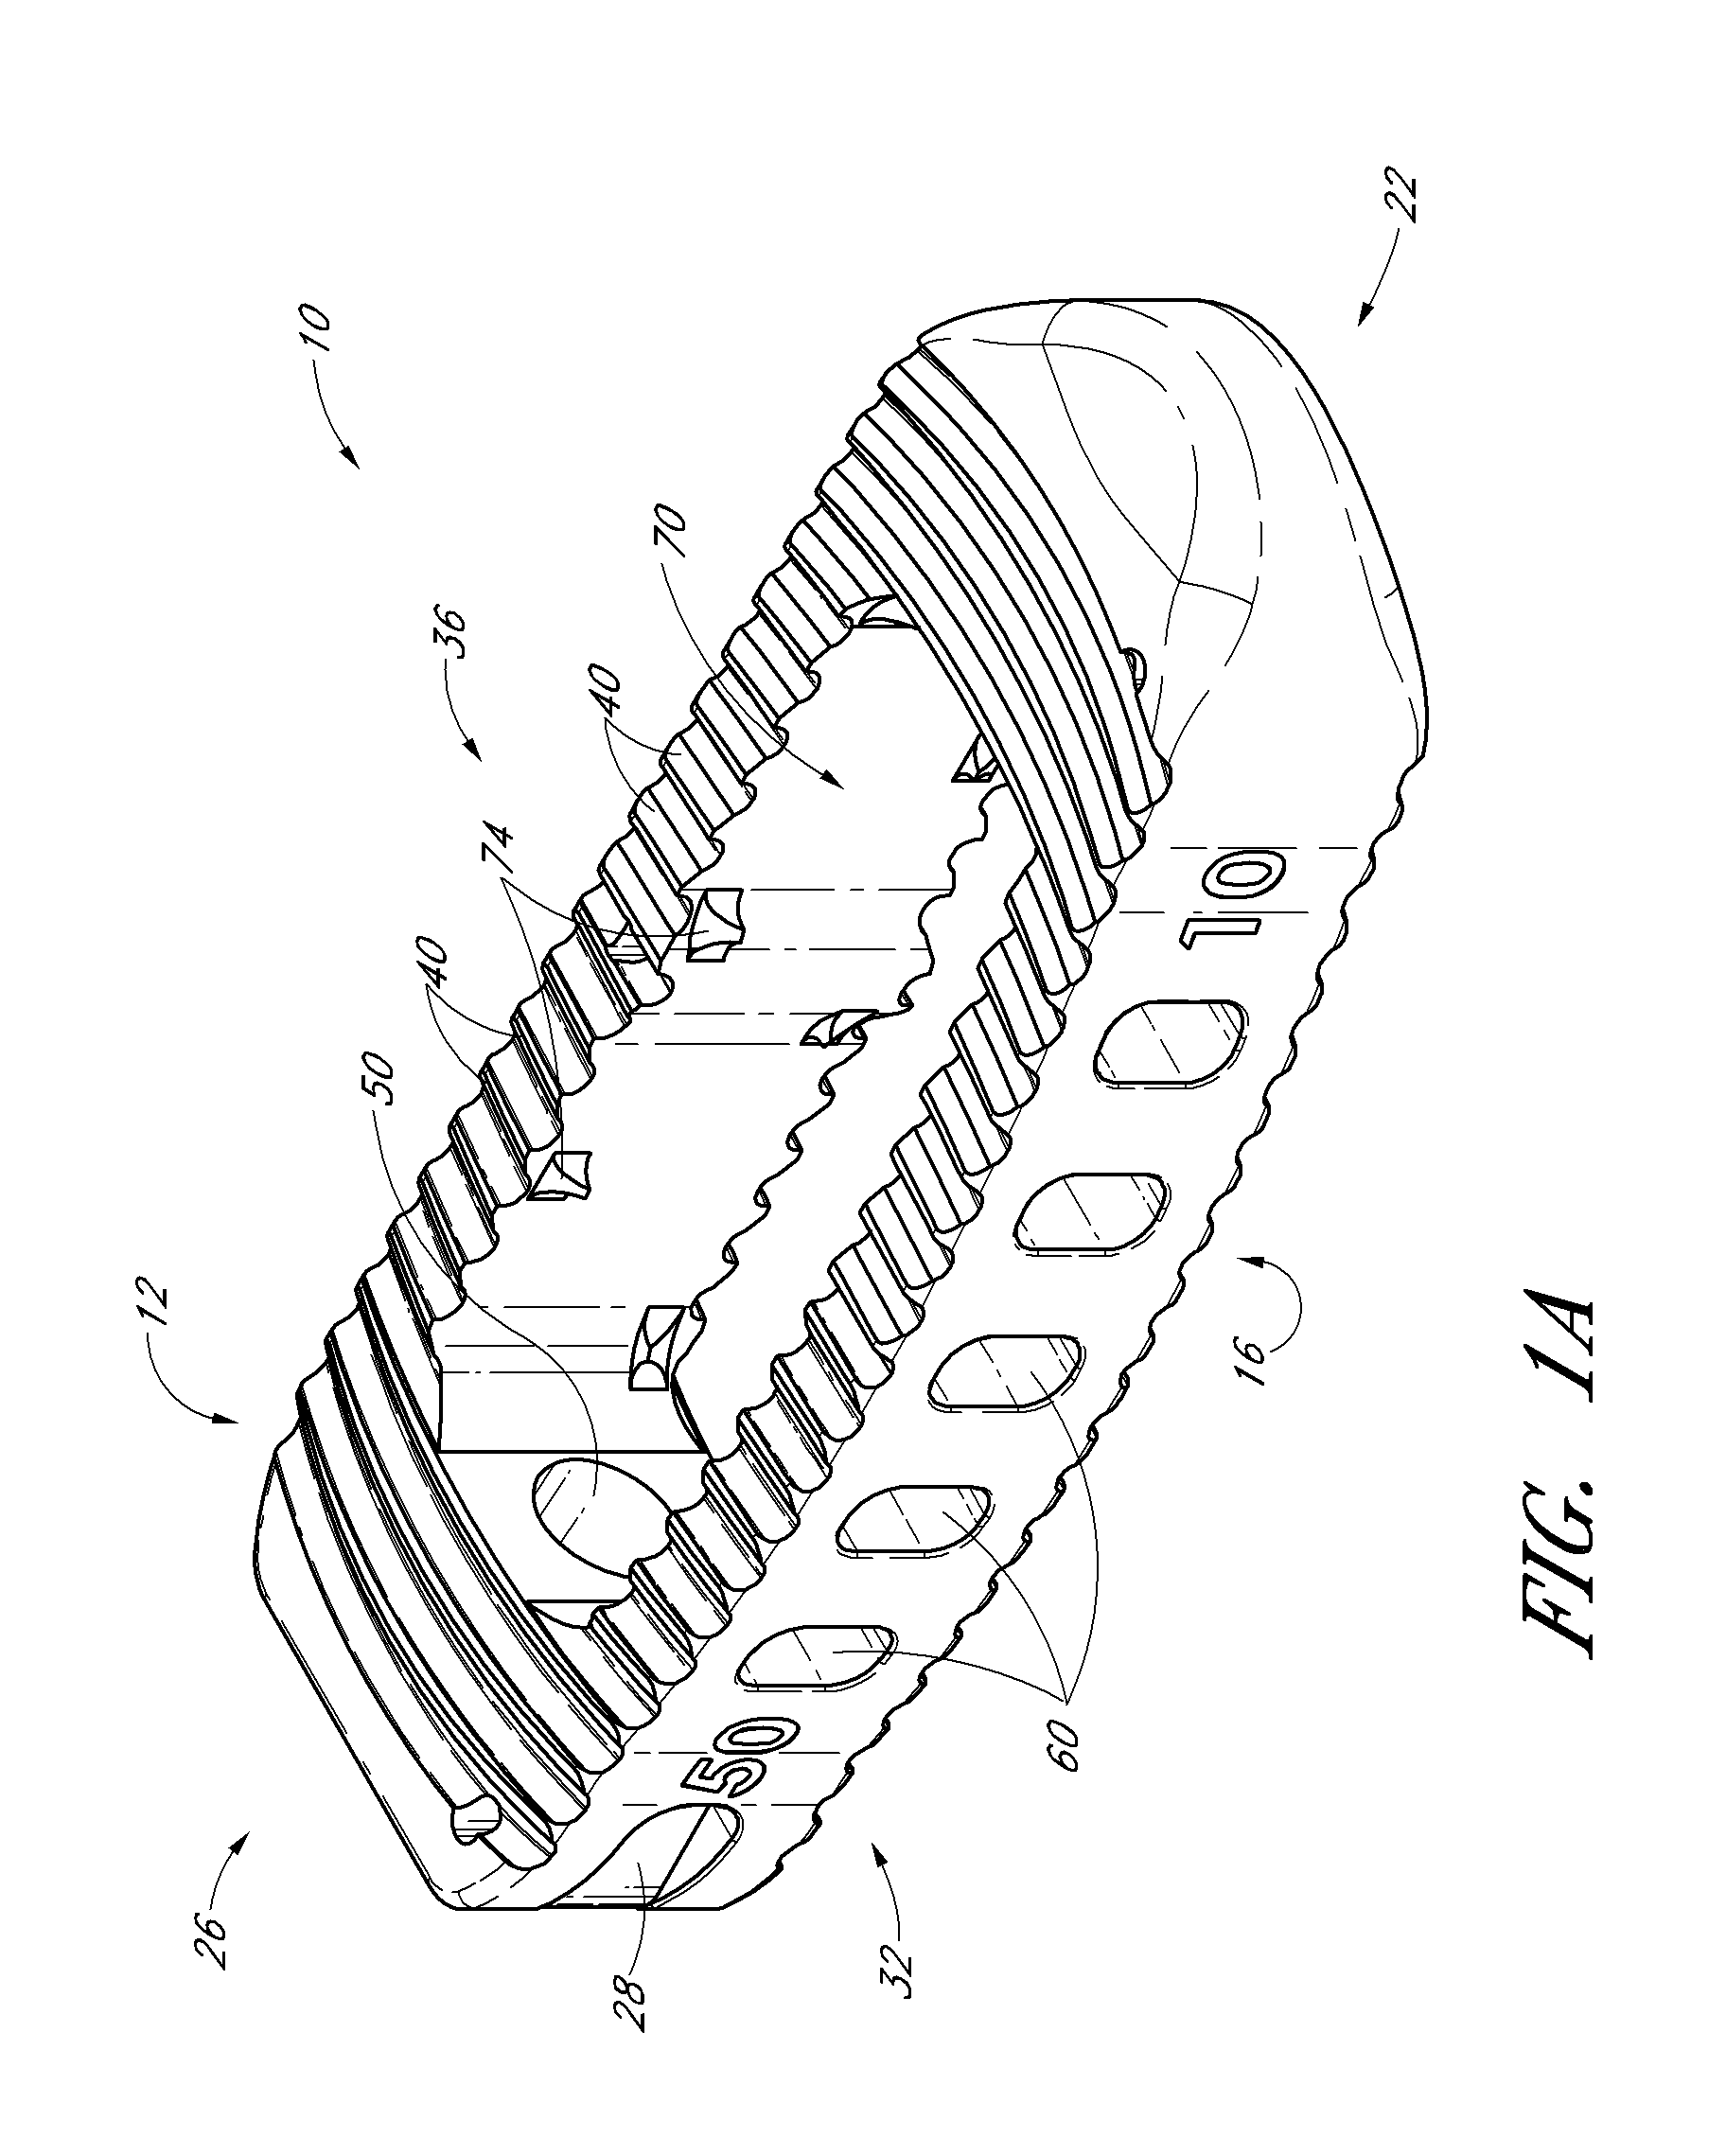 Intervertebral implants and graft delivery systems and methods